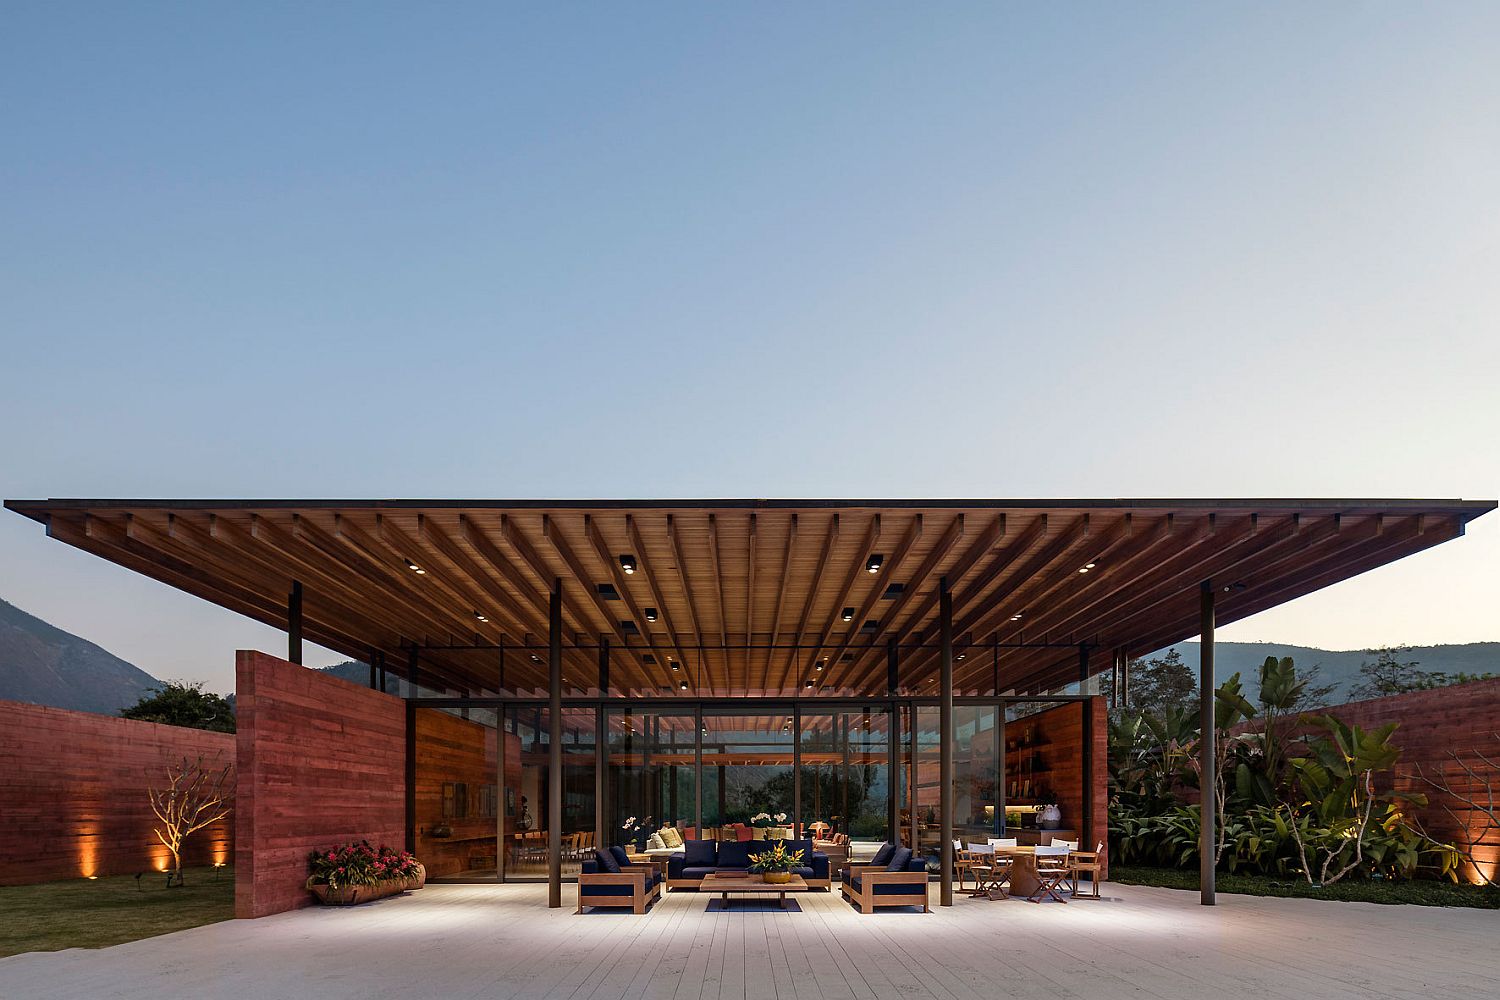 Casa Terra in Brazil created from intersecting planes and walls